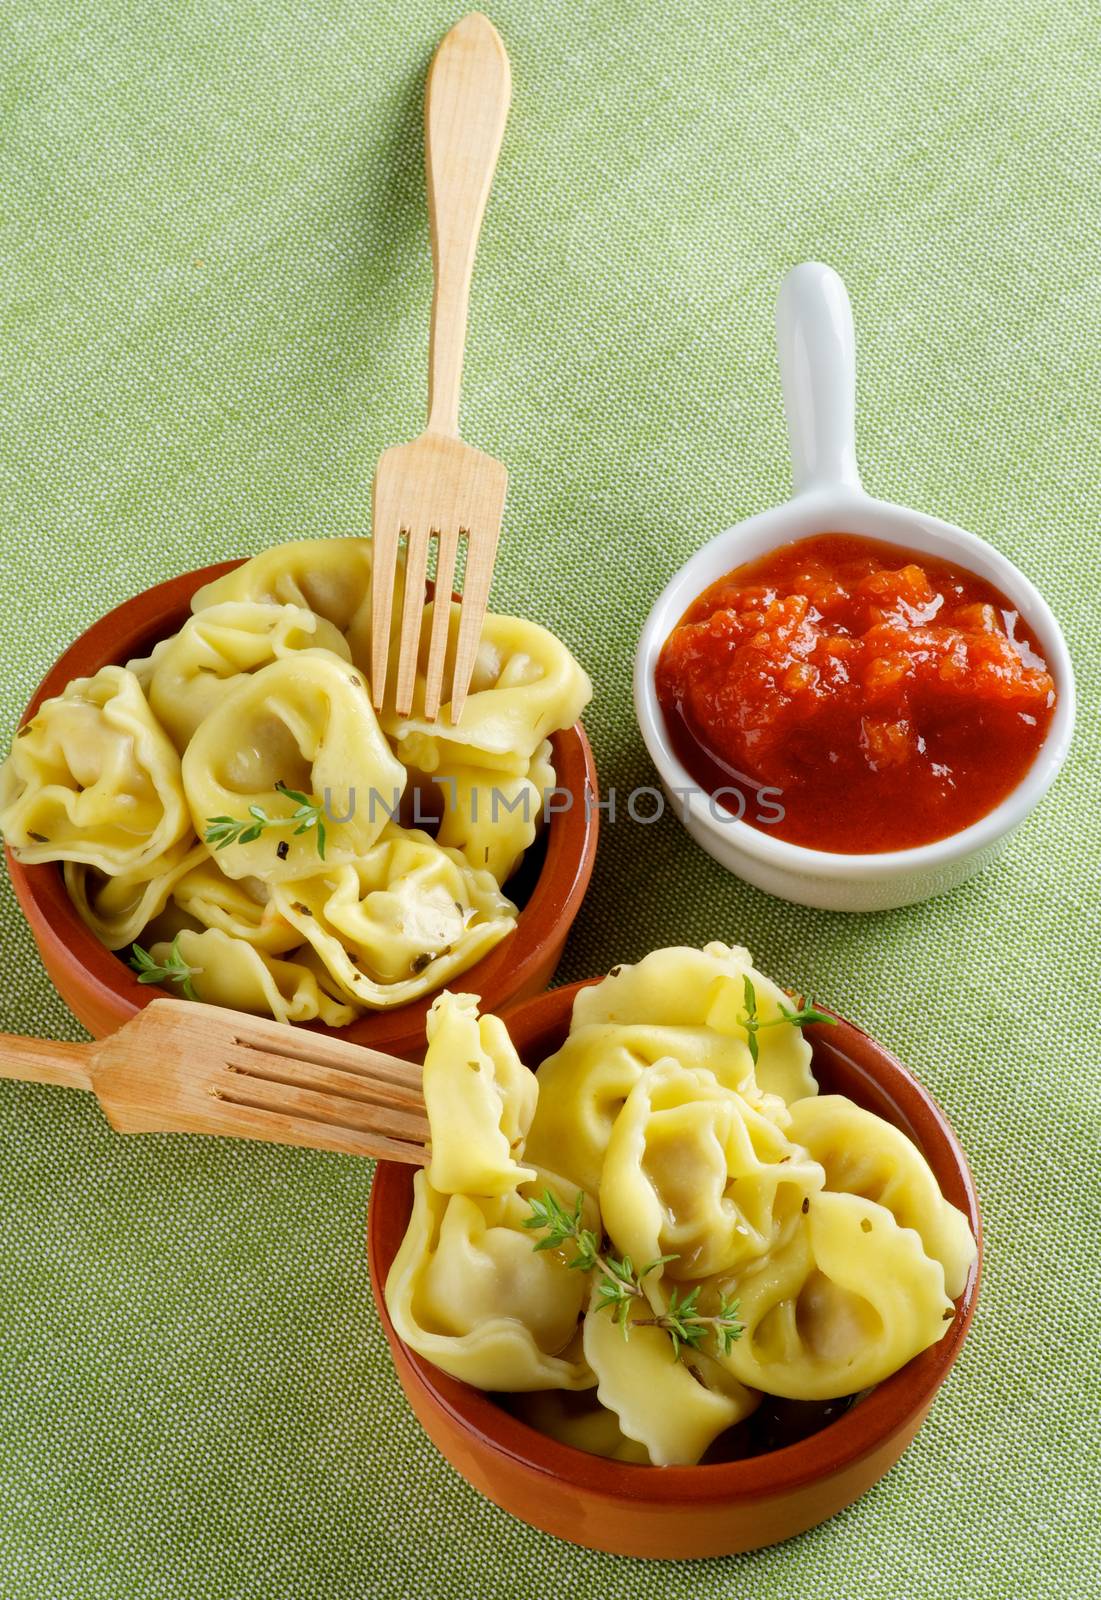 Delicious Meat Cappelletti in Ceramic Bowls with Tomatoes Sauce and Wooden Forks closeup on Green Napkin background